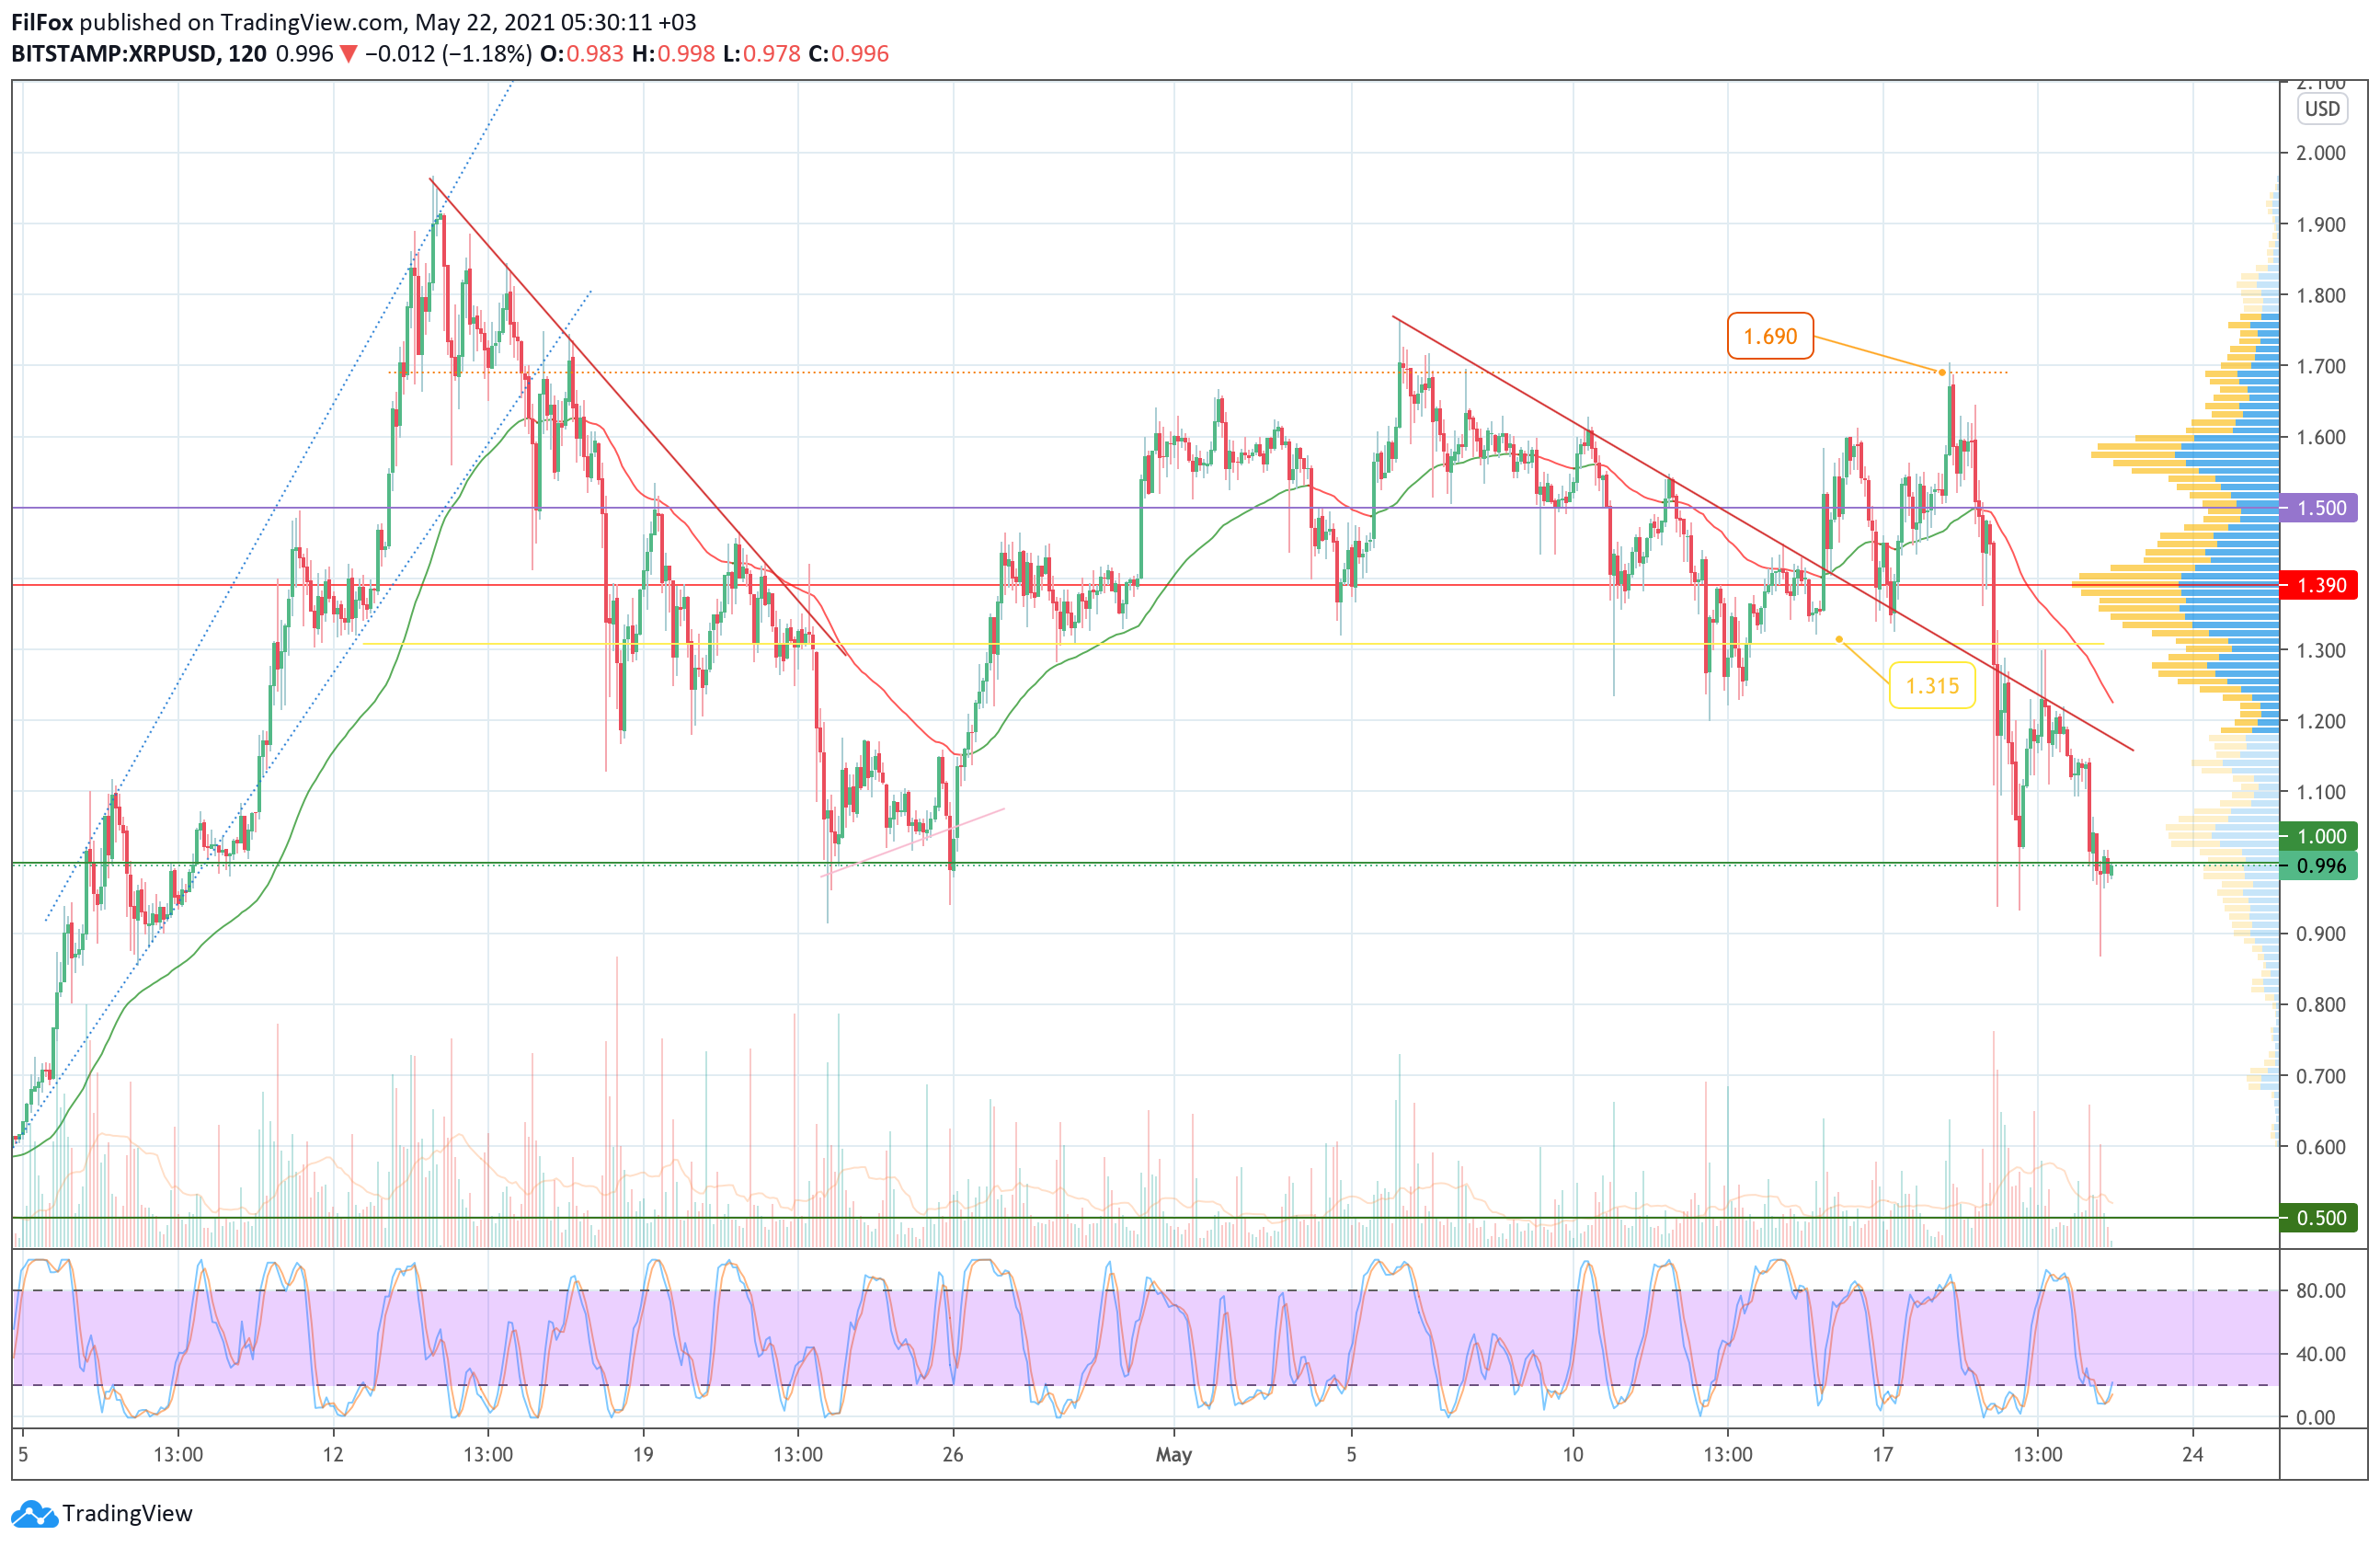 Analysis of the prices of Bitcoin, Ethereum, XRP for 05/22/2021